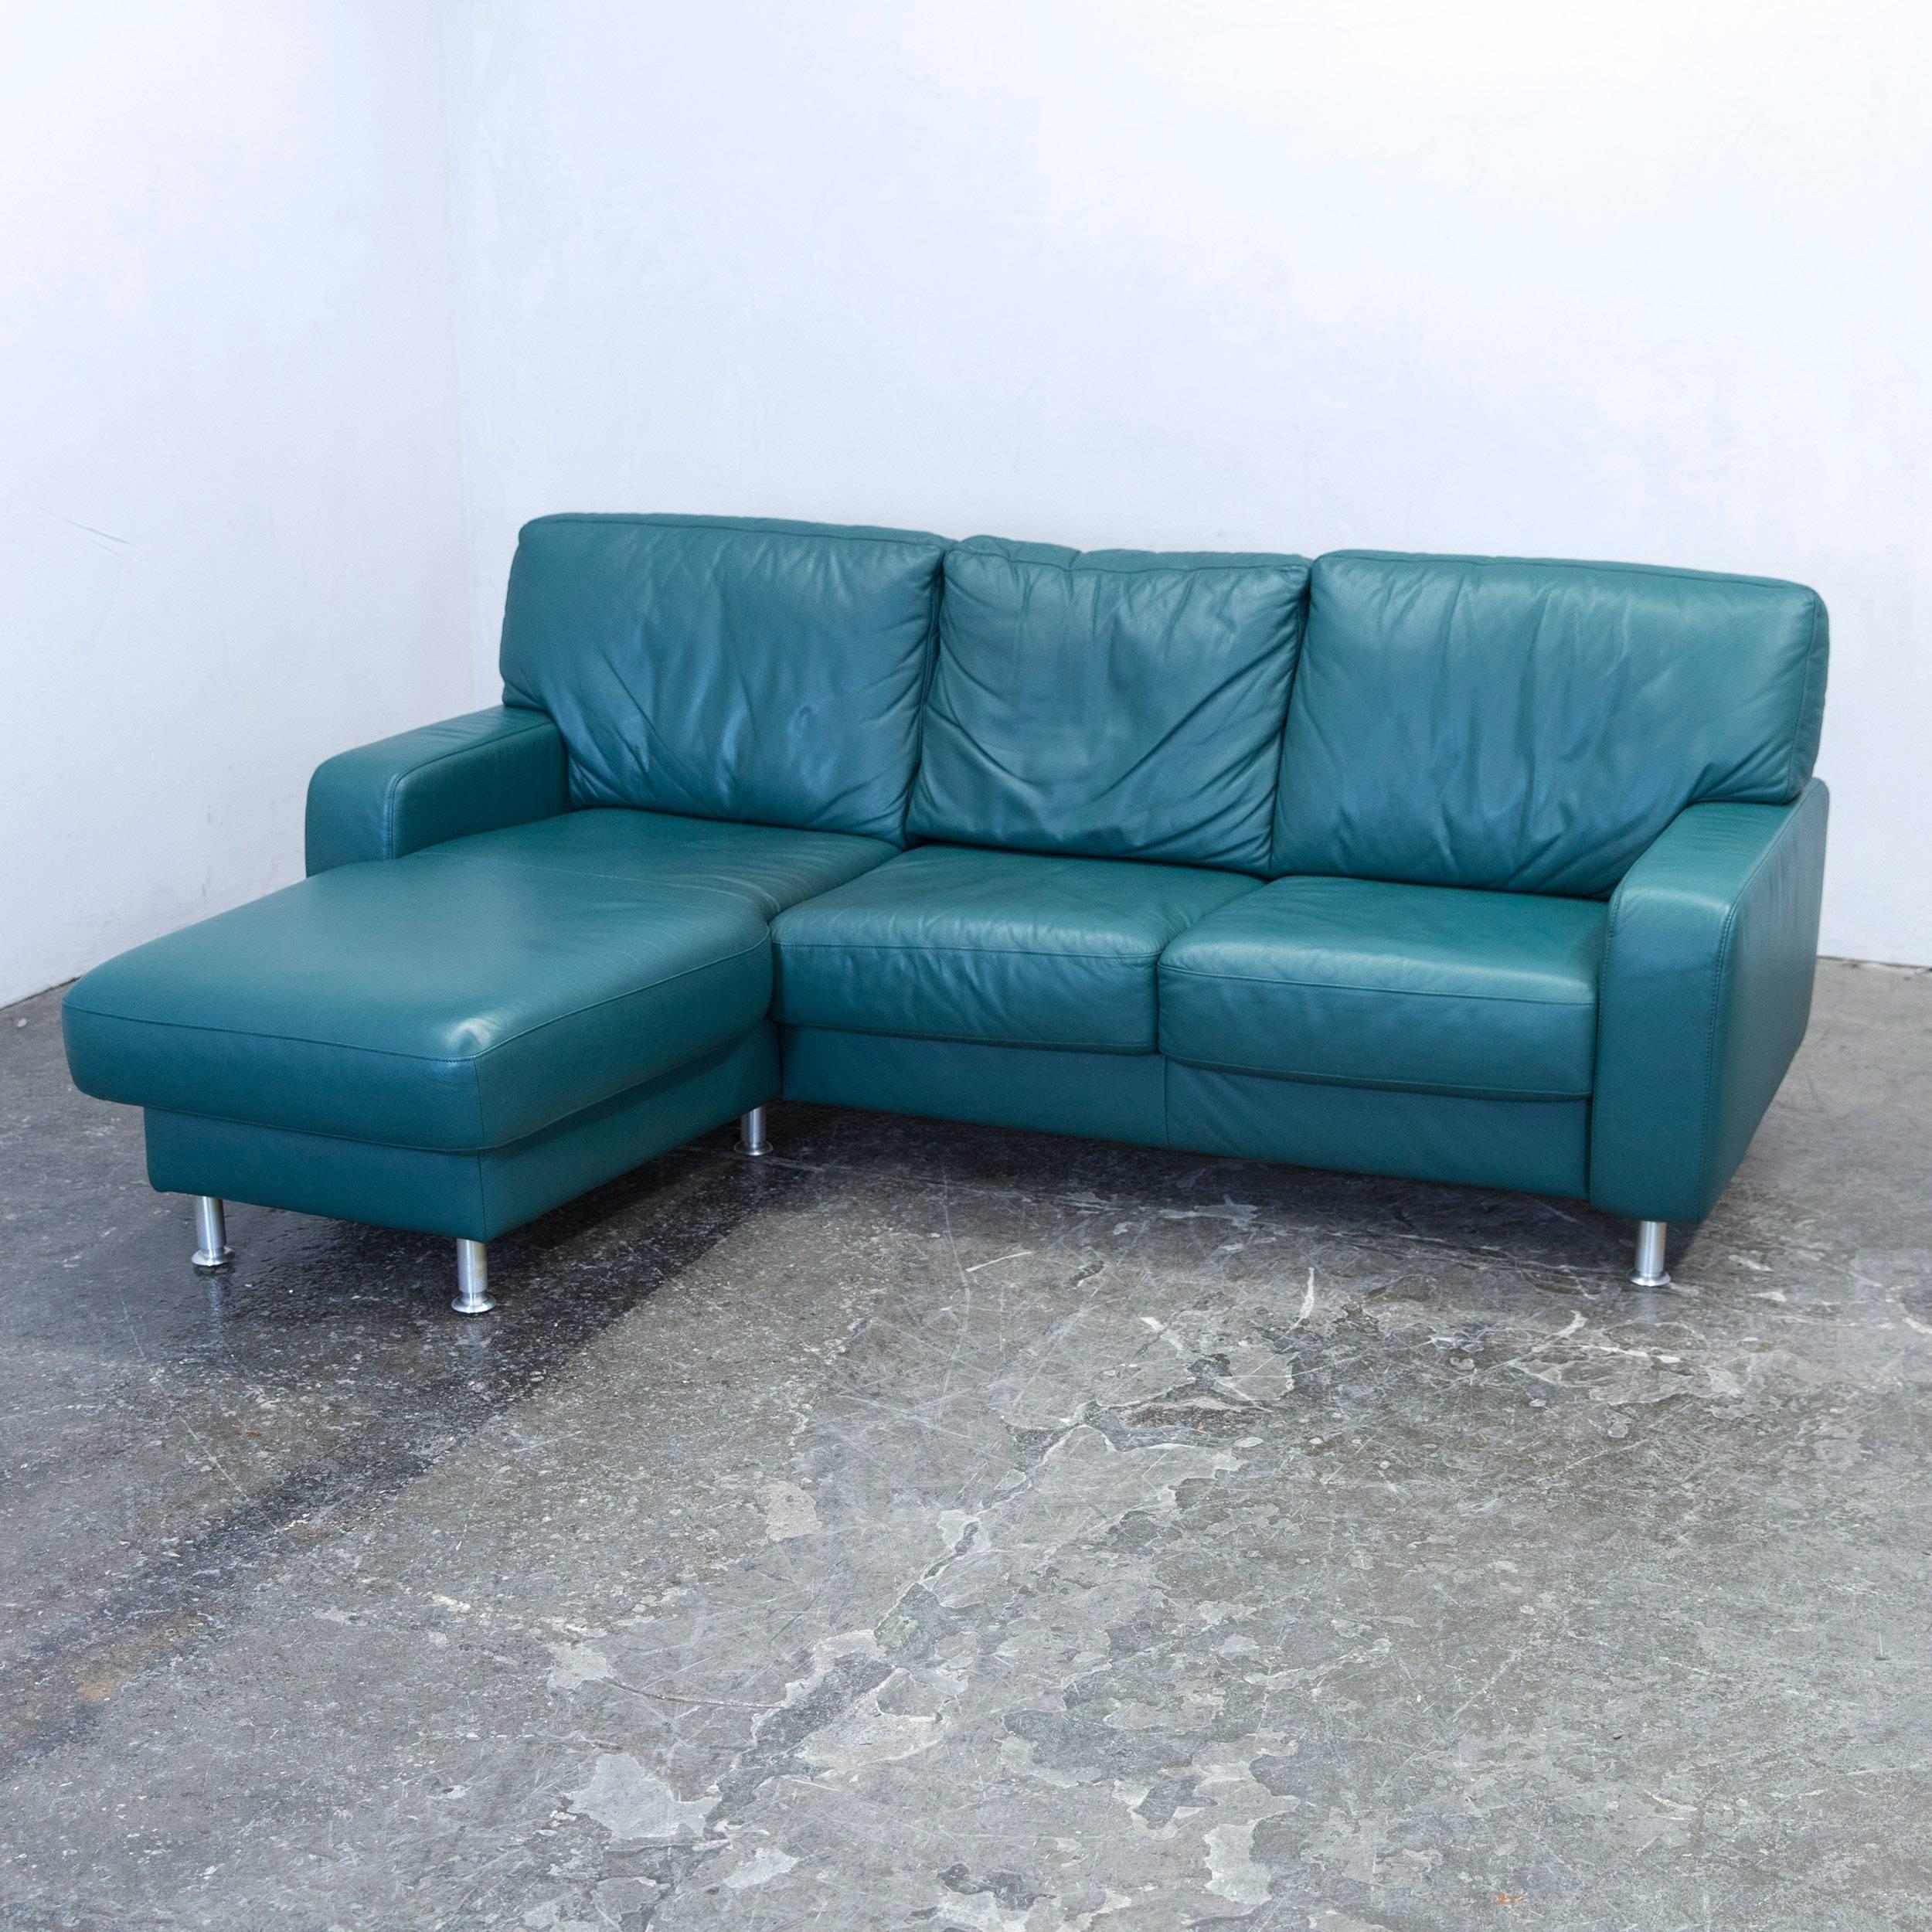 Green colored original Koinor designer leather sofa, in a minimalistic and modern design, made for pure comfort and style.